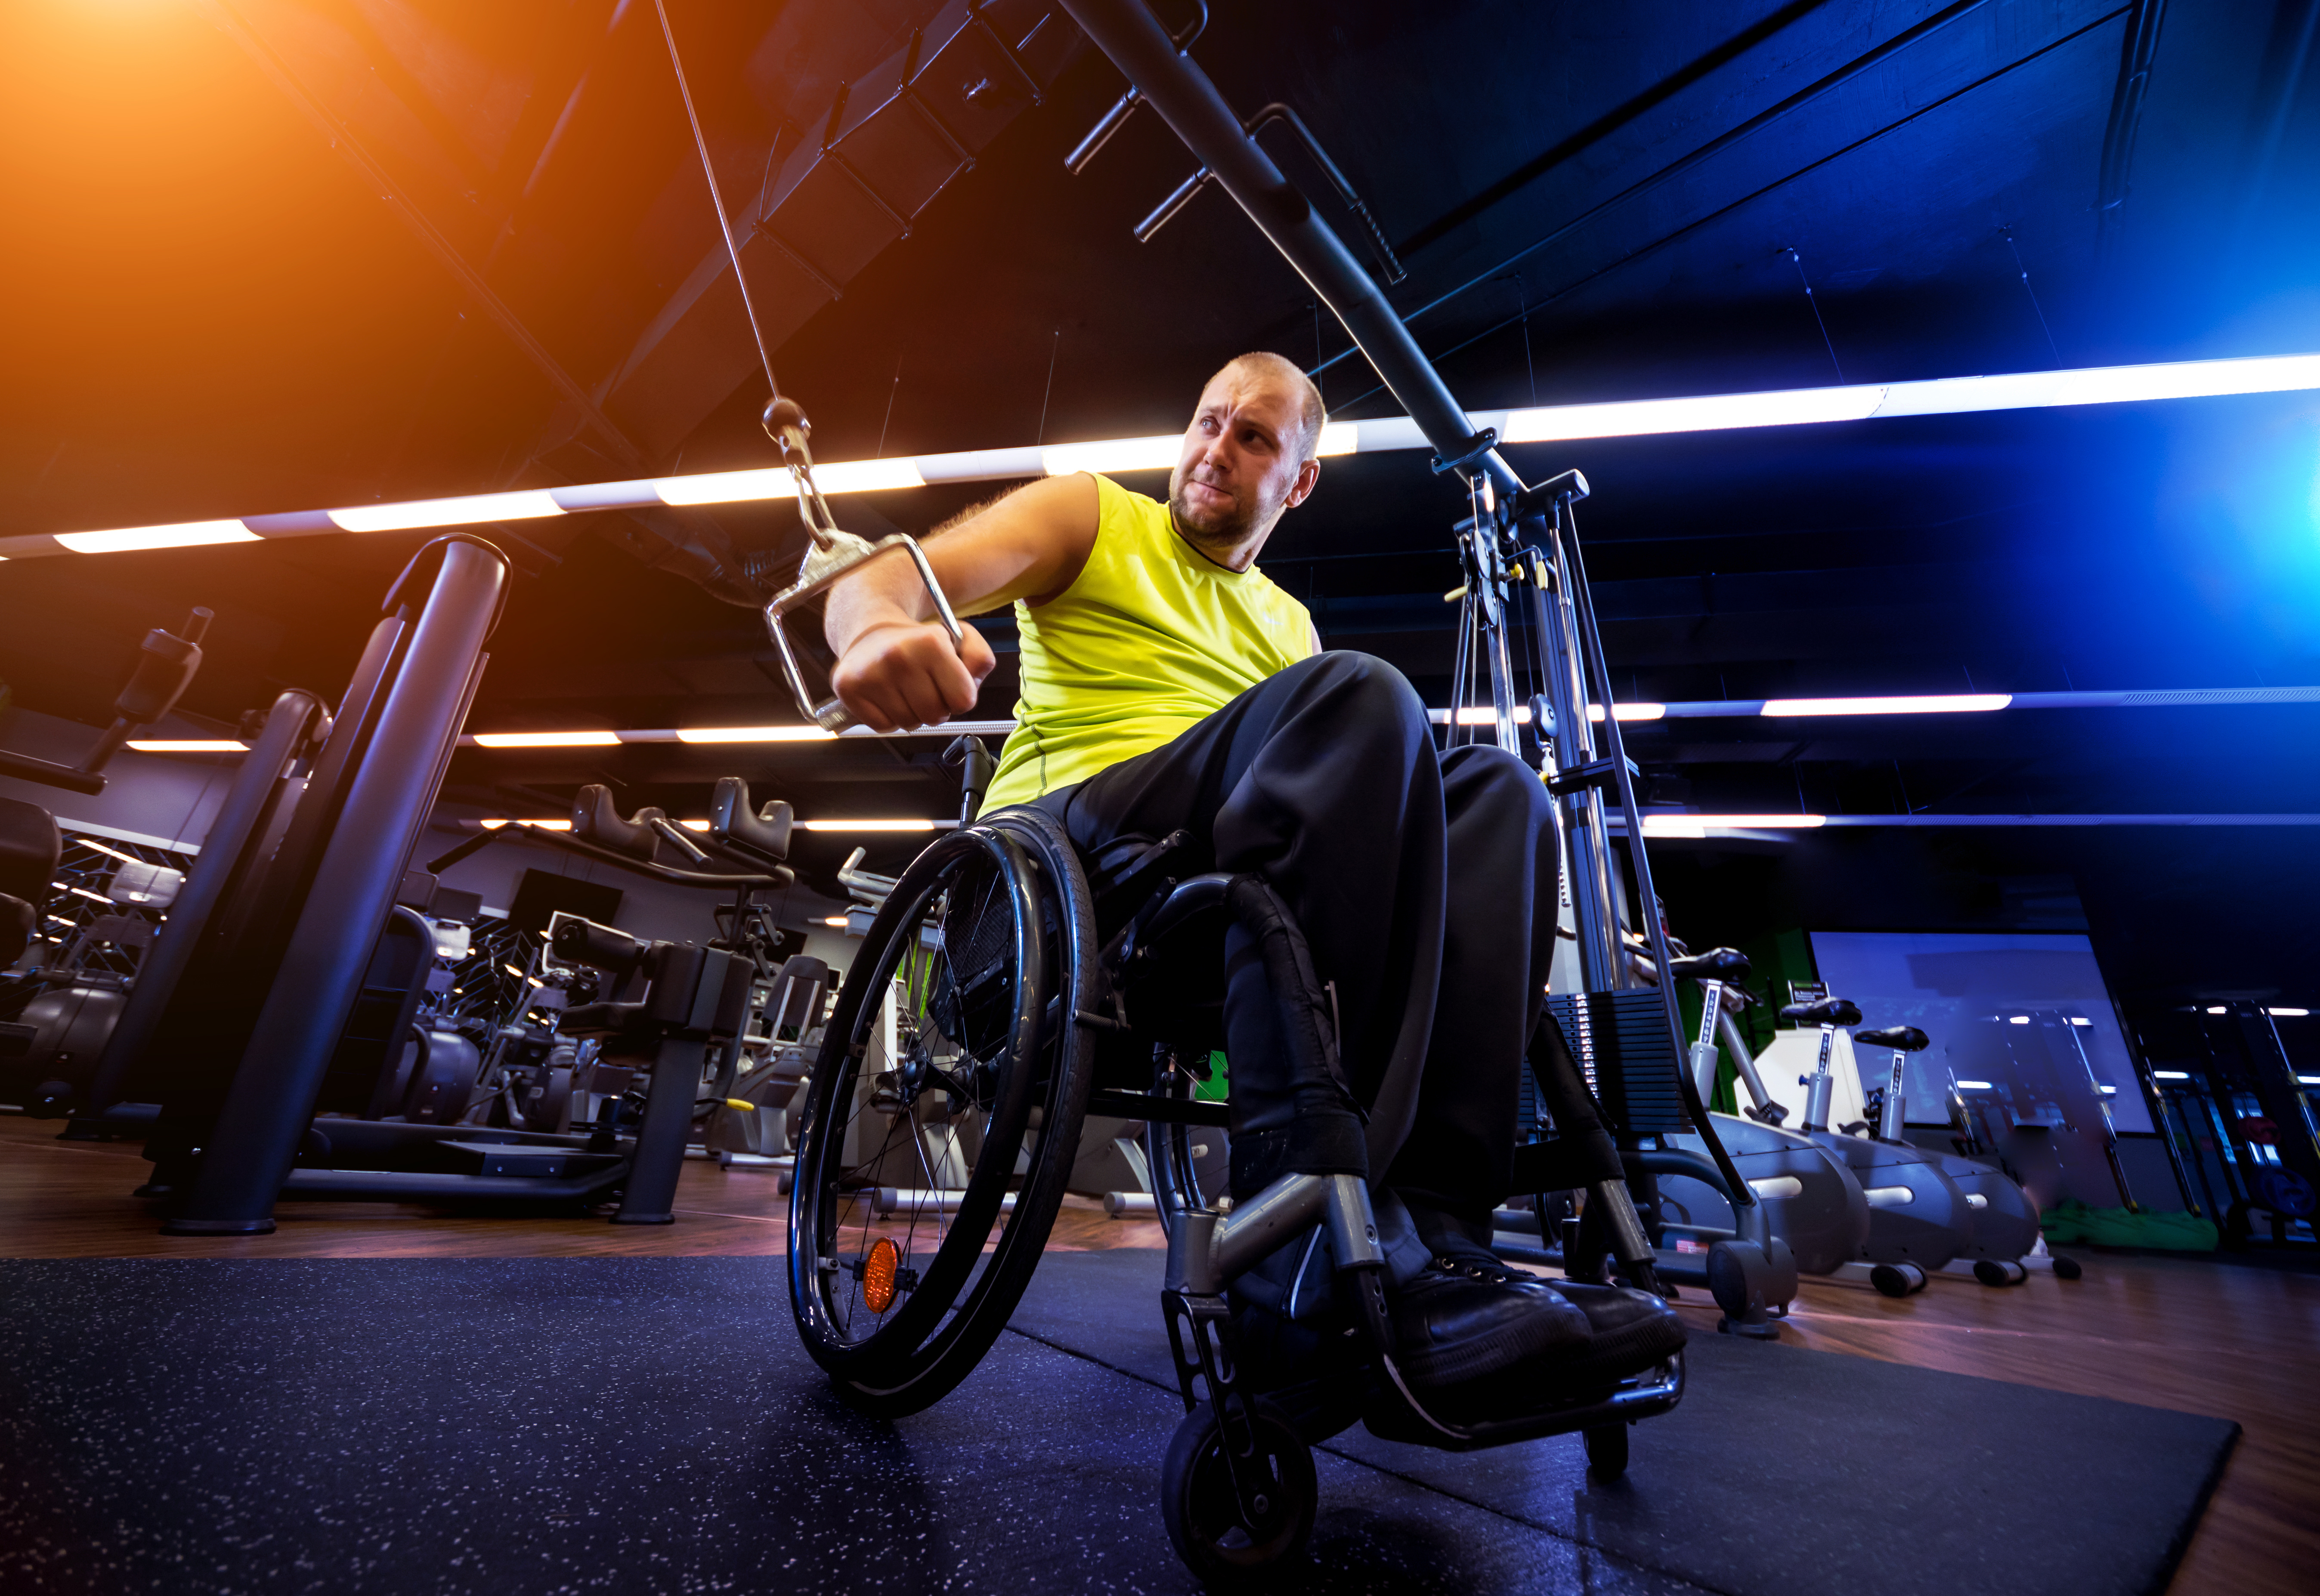 "A man sitting in a wheelchair uses an exercise machine at a gym"